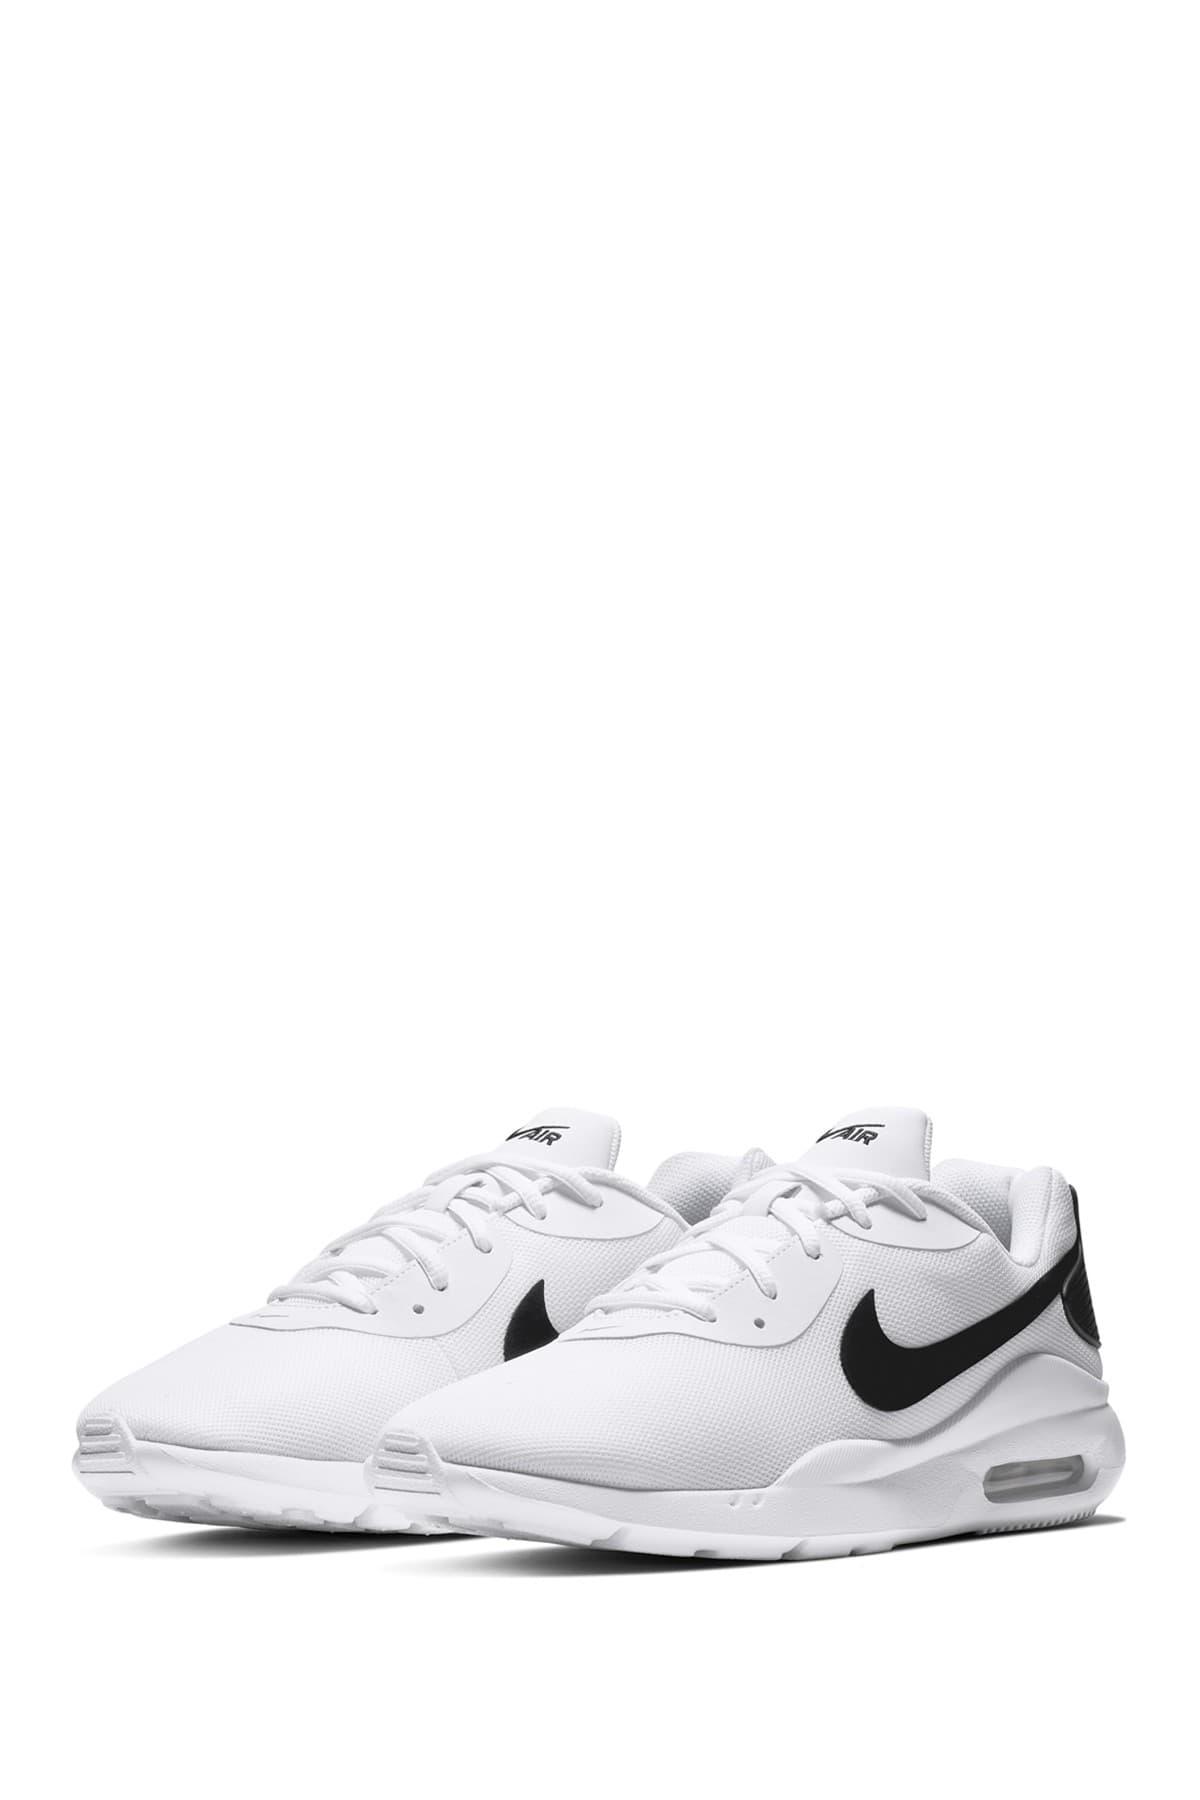 Nike Synthetic Air Max Oketo Shoes in White/Black (White) for Men | Lyst